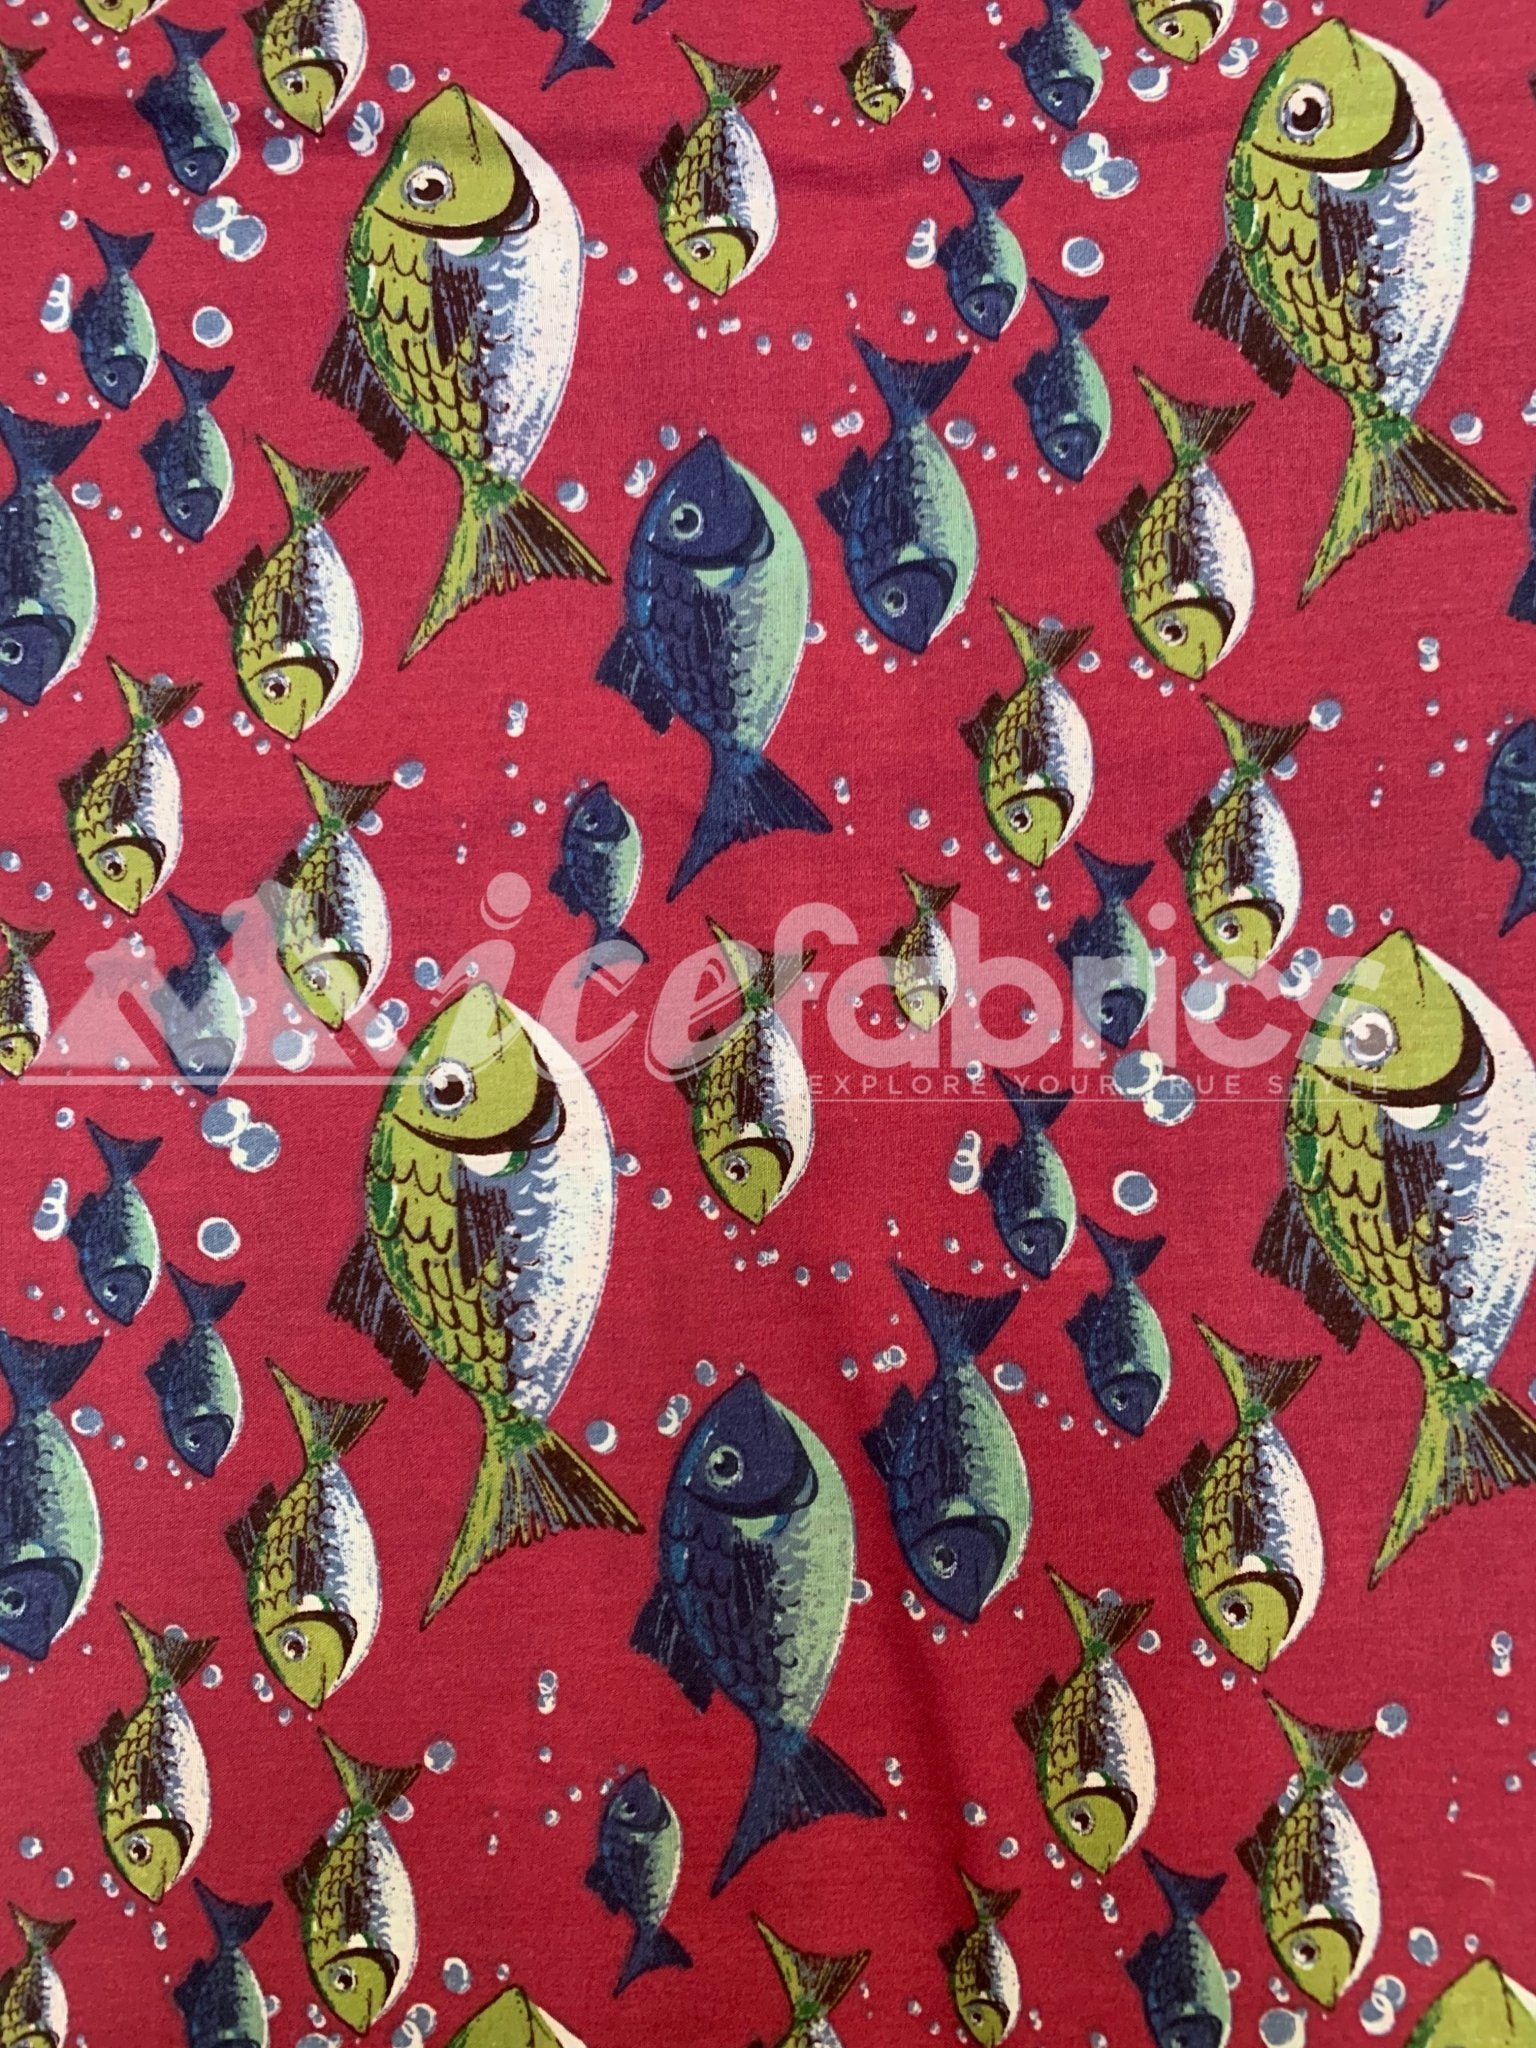 Fashion Fish Print Poly Cotton Fabric By The Yard (Red, Gray, Blue)Cotton FabricICEFABRICICE FABRICSRedFashion Fish Print Poly Cotton Fabric By The Yard (Red, Gray, Blue) ICEFABRIC Red